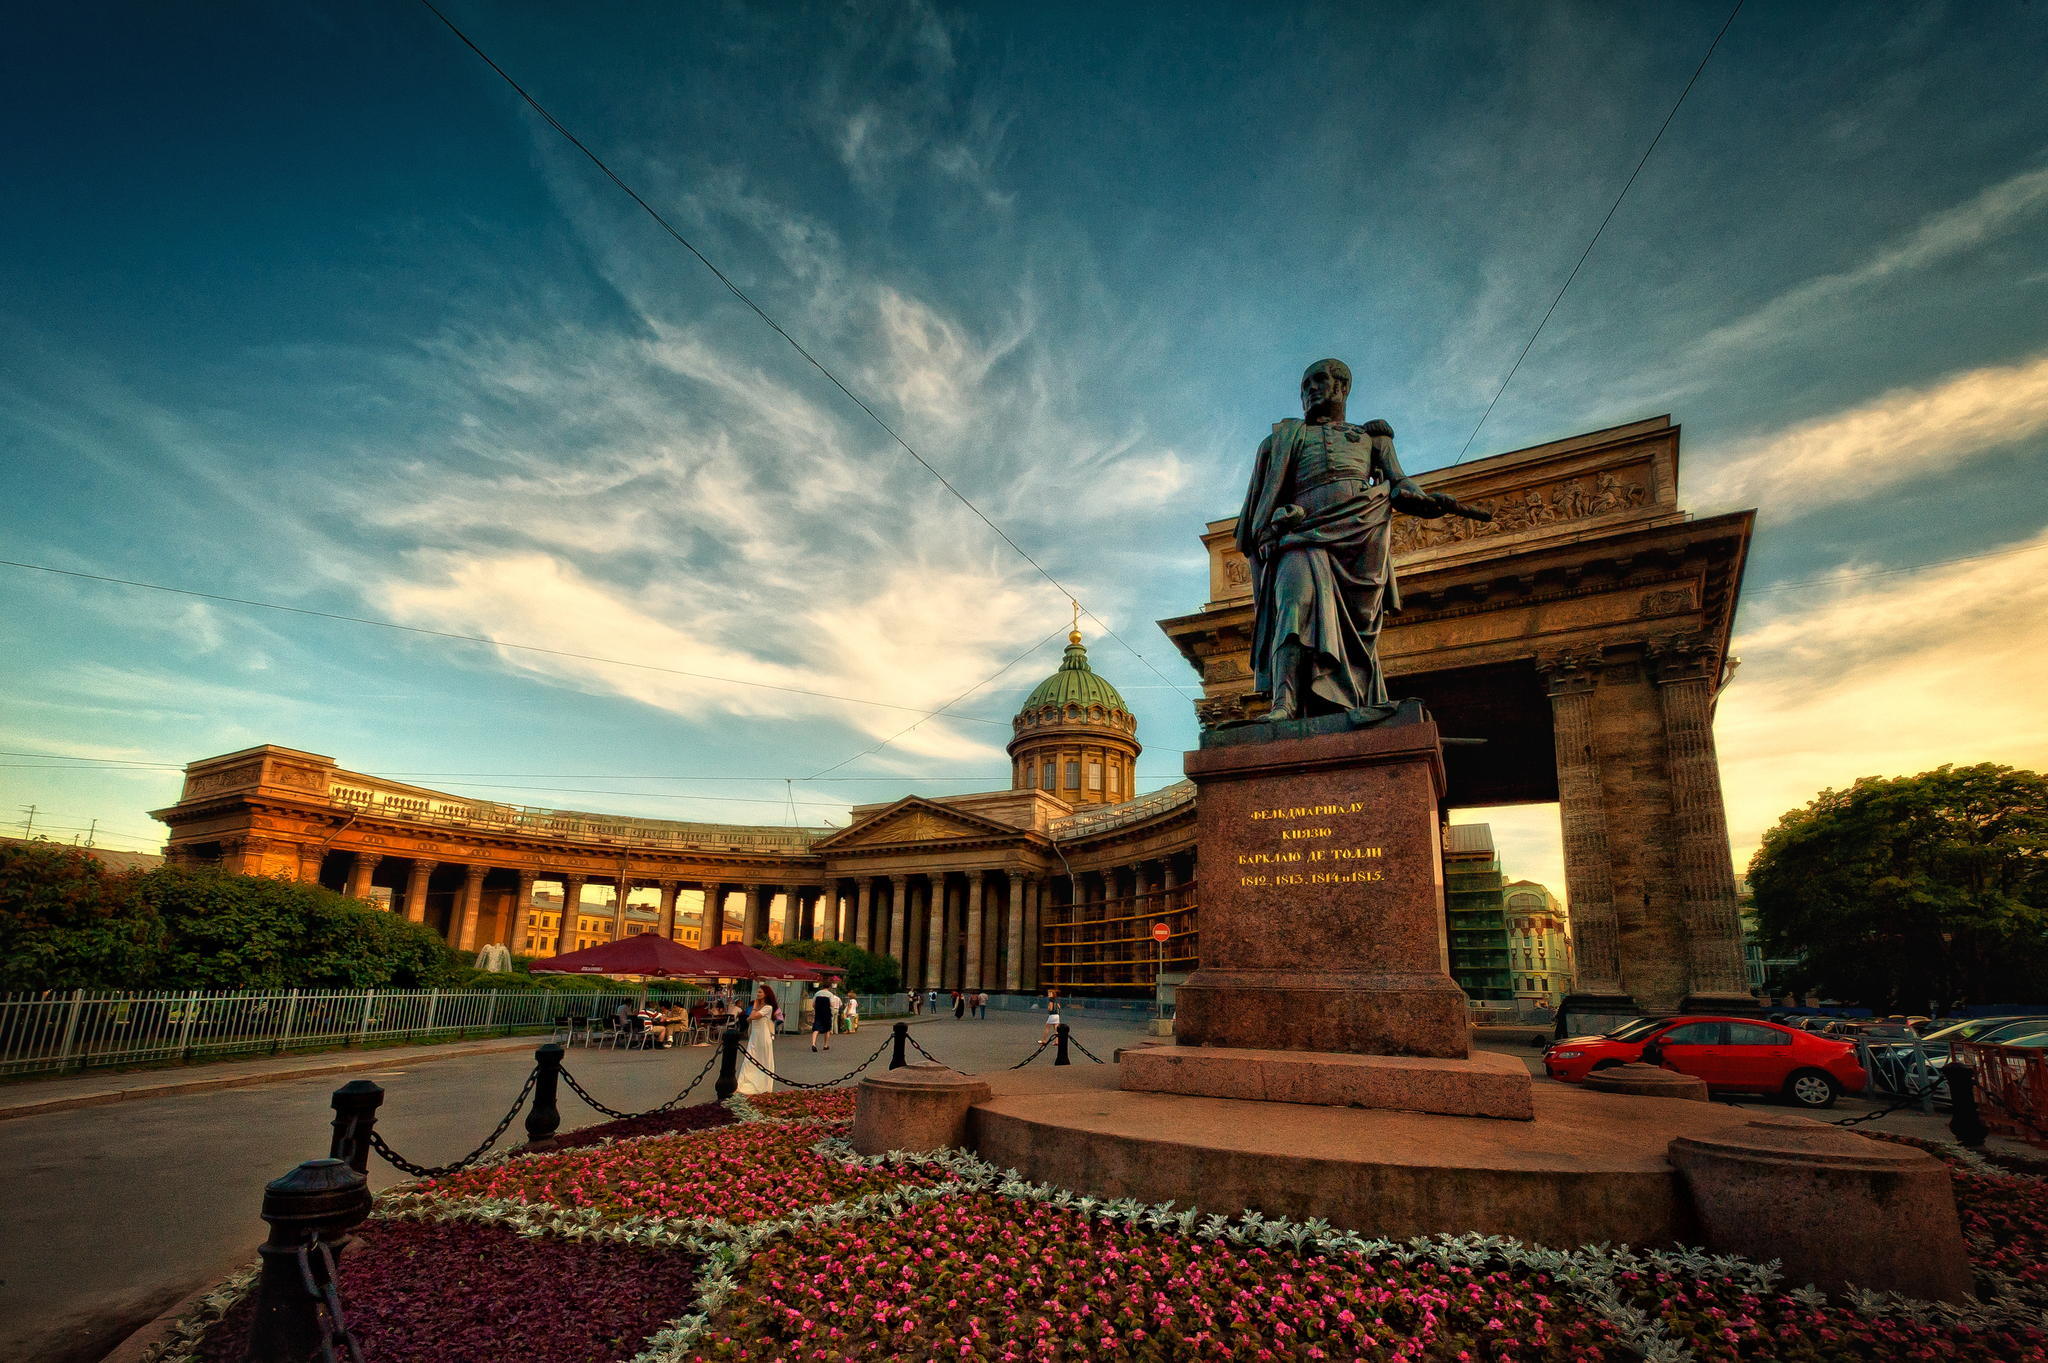 25 Saint Petersburg HD Wallpapers | Background Images - Wallpaper Abyss